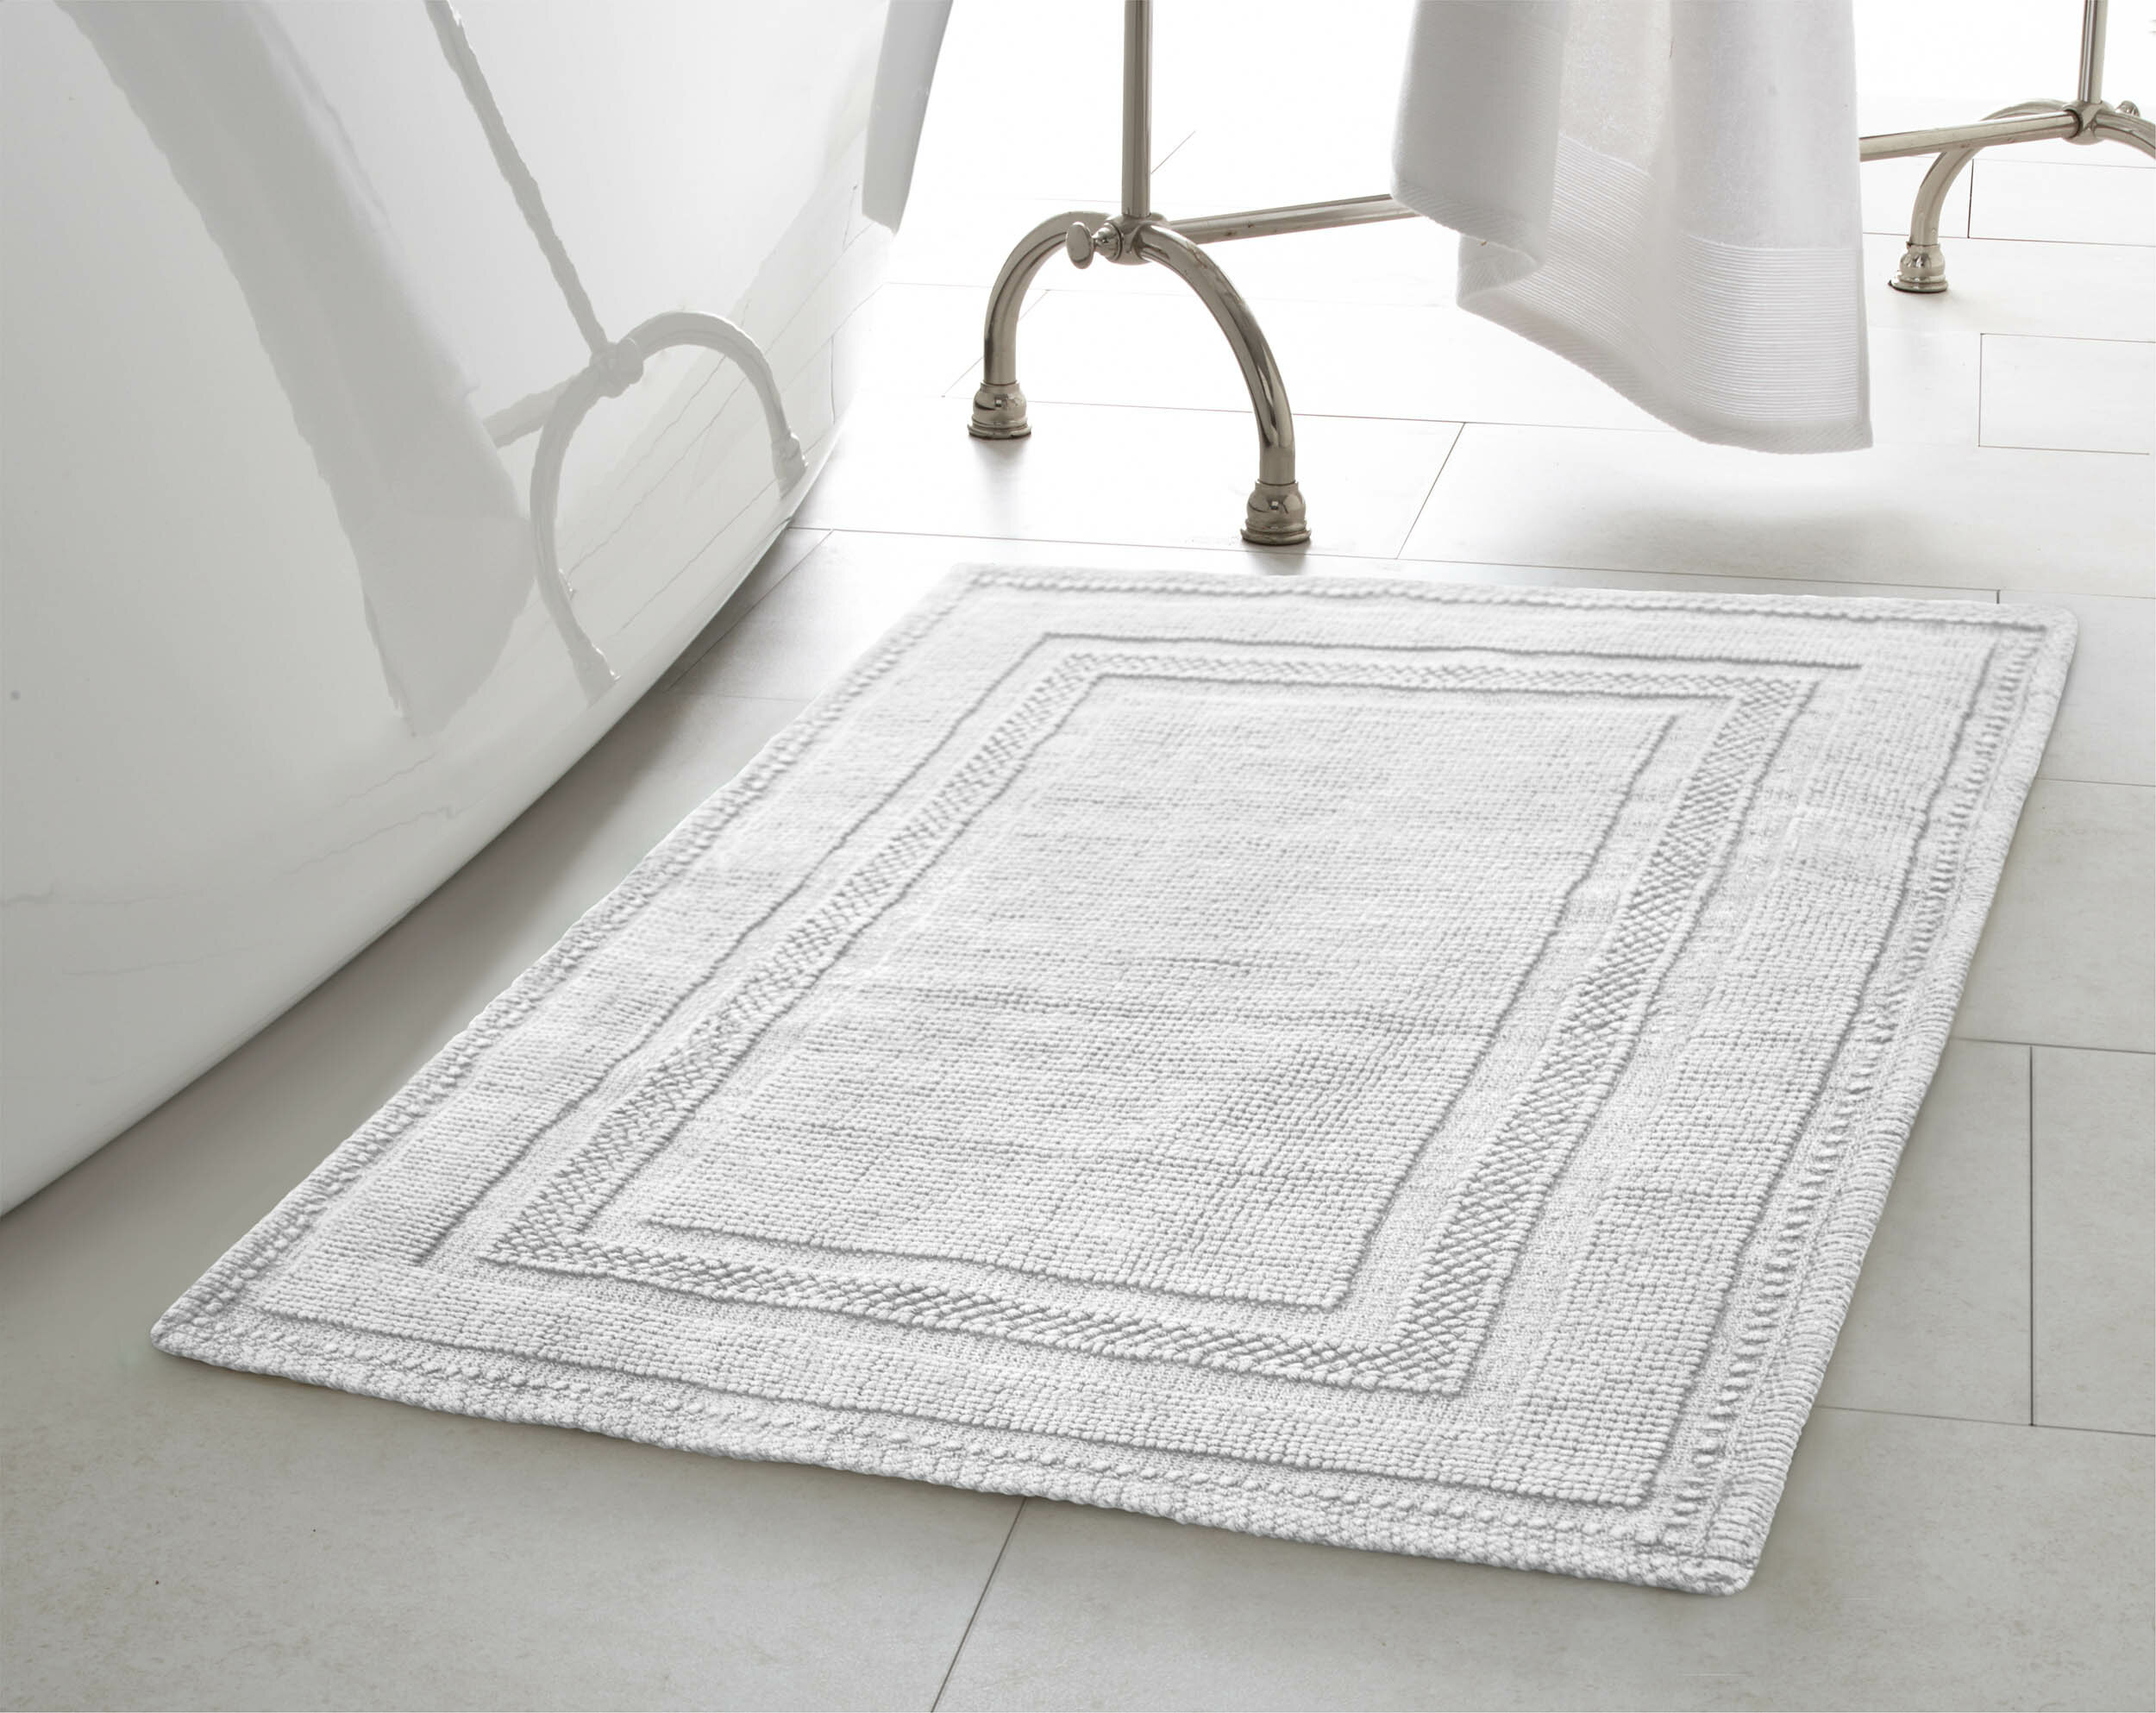 Traditional Washable Nonskid Backing Bathroom Rugs Deep Fern 24 in x 40 in 